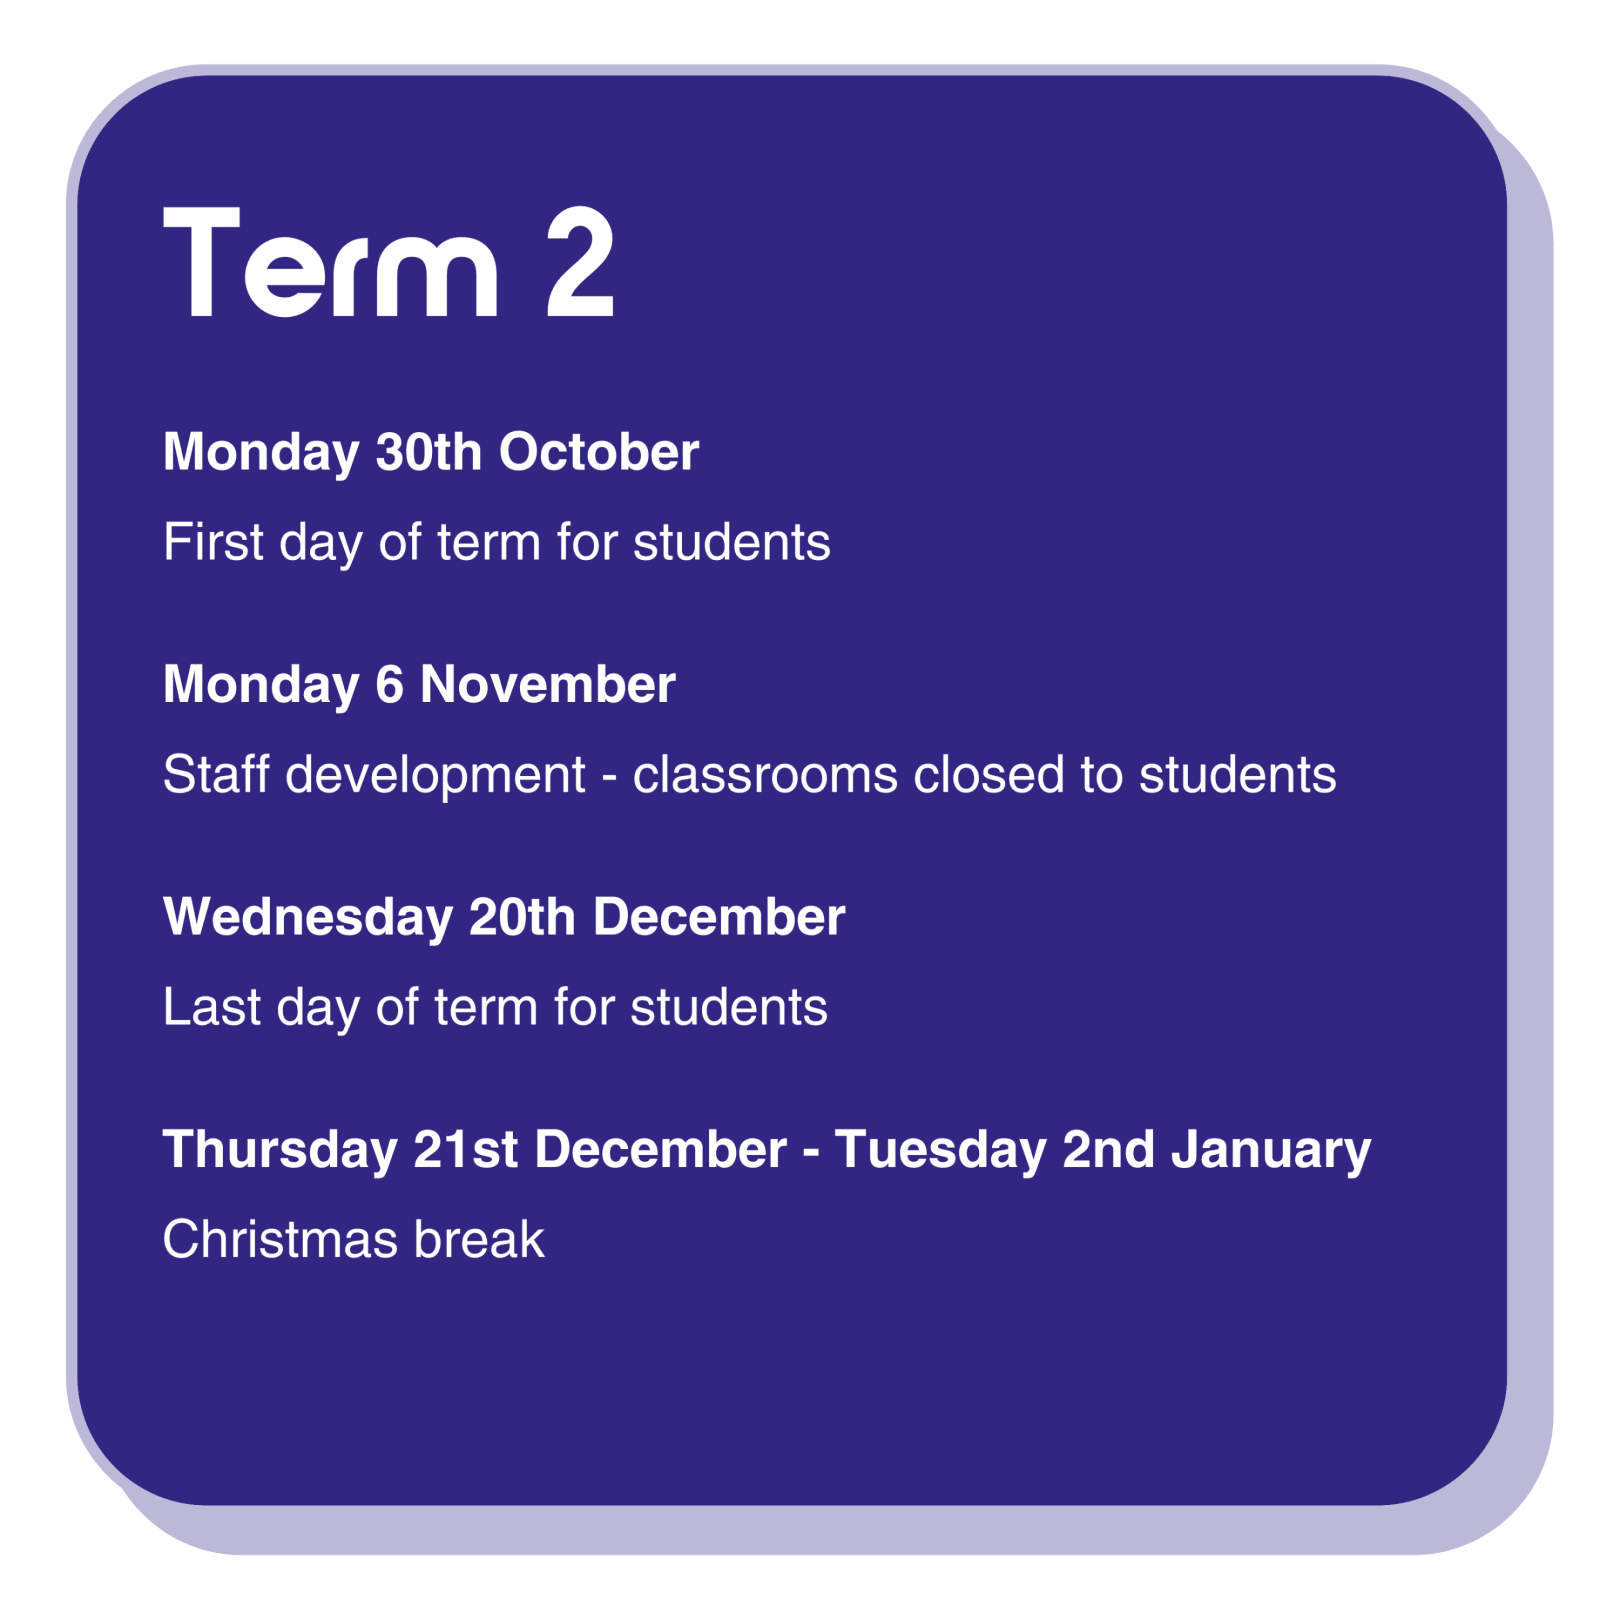 Term 2 dates information infographic with the following text: Monday 30th October is the first day of term for students. Monday 6 November is a staff development day, classrooms are closed to students. Wednesday 20th December is the last day of term for students. Thursday 21st December - Tuesday 2nd January is the Christmas break.